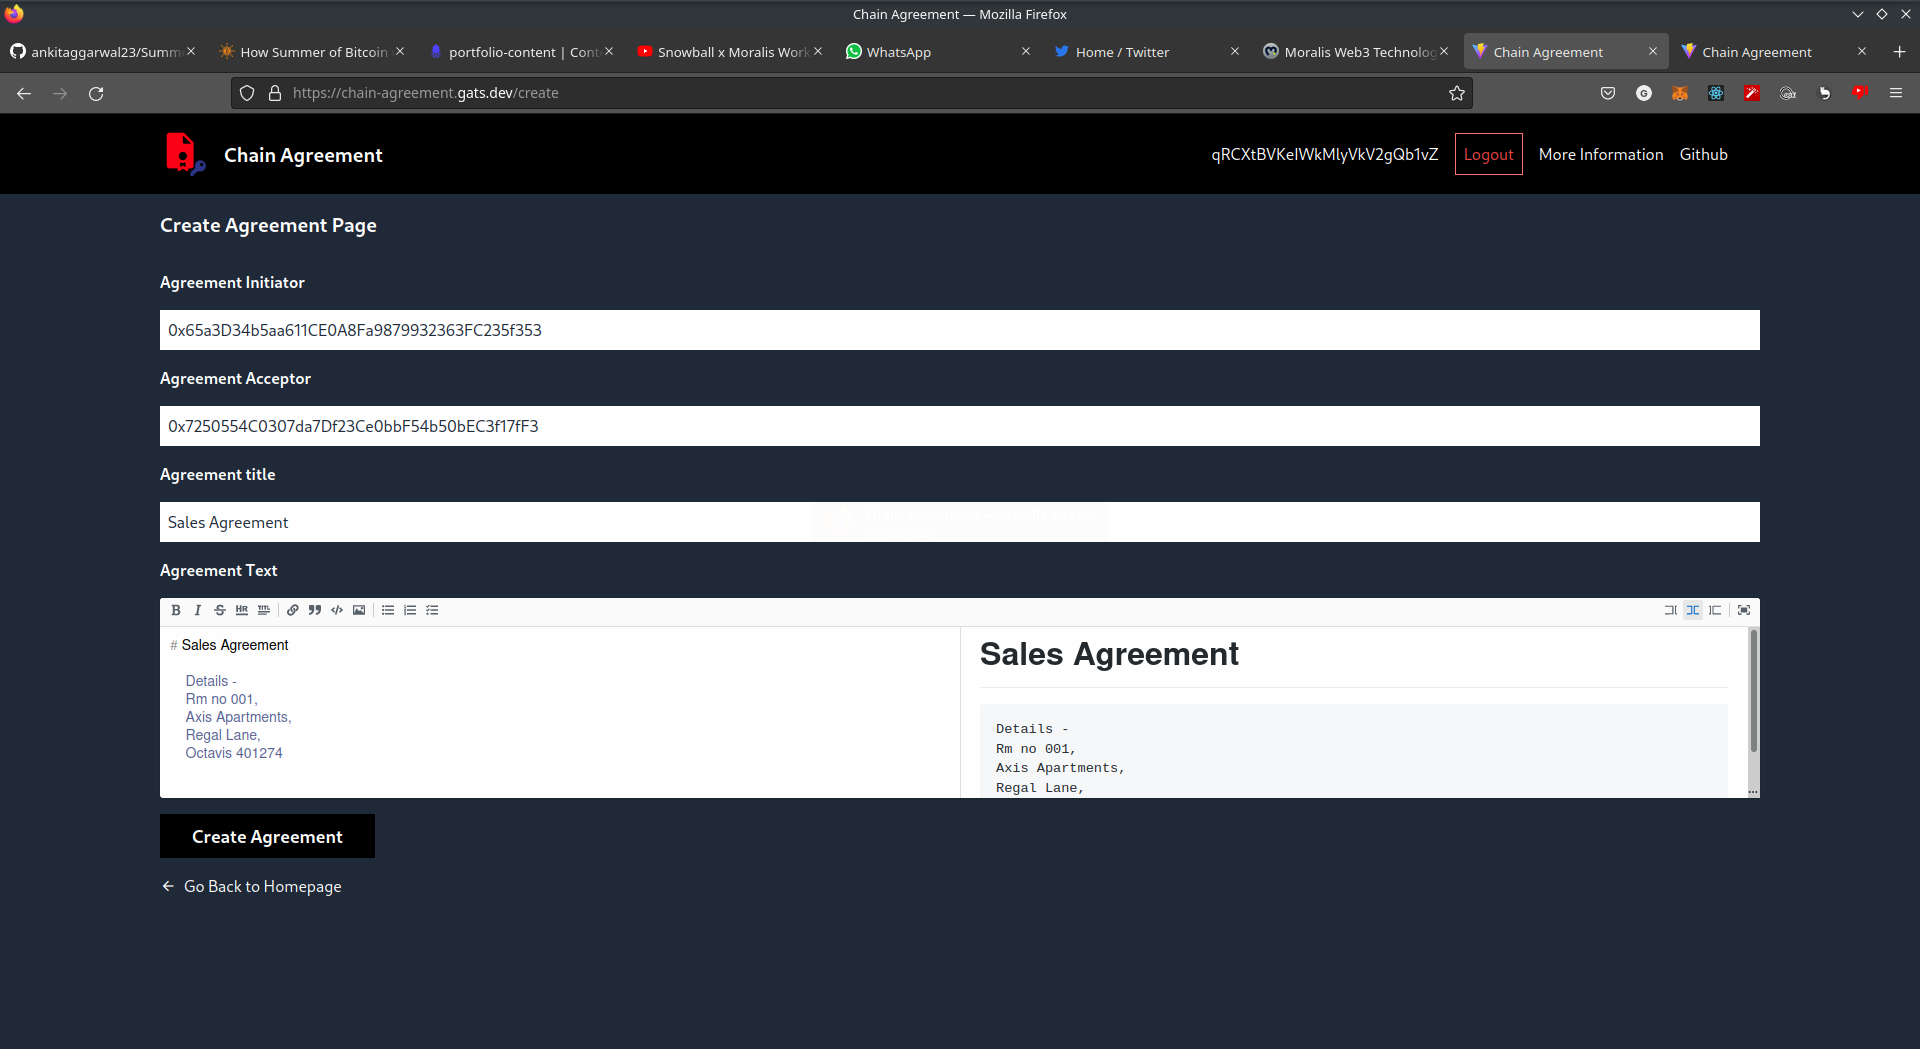 Agreement Creation page with details filled in